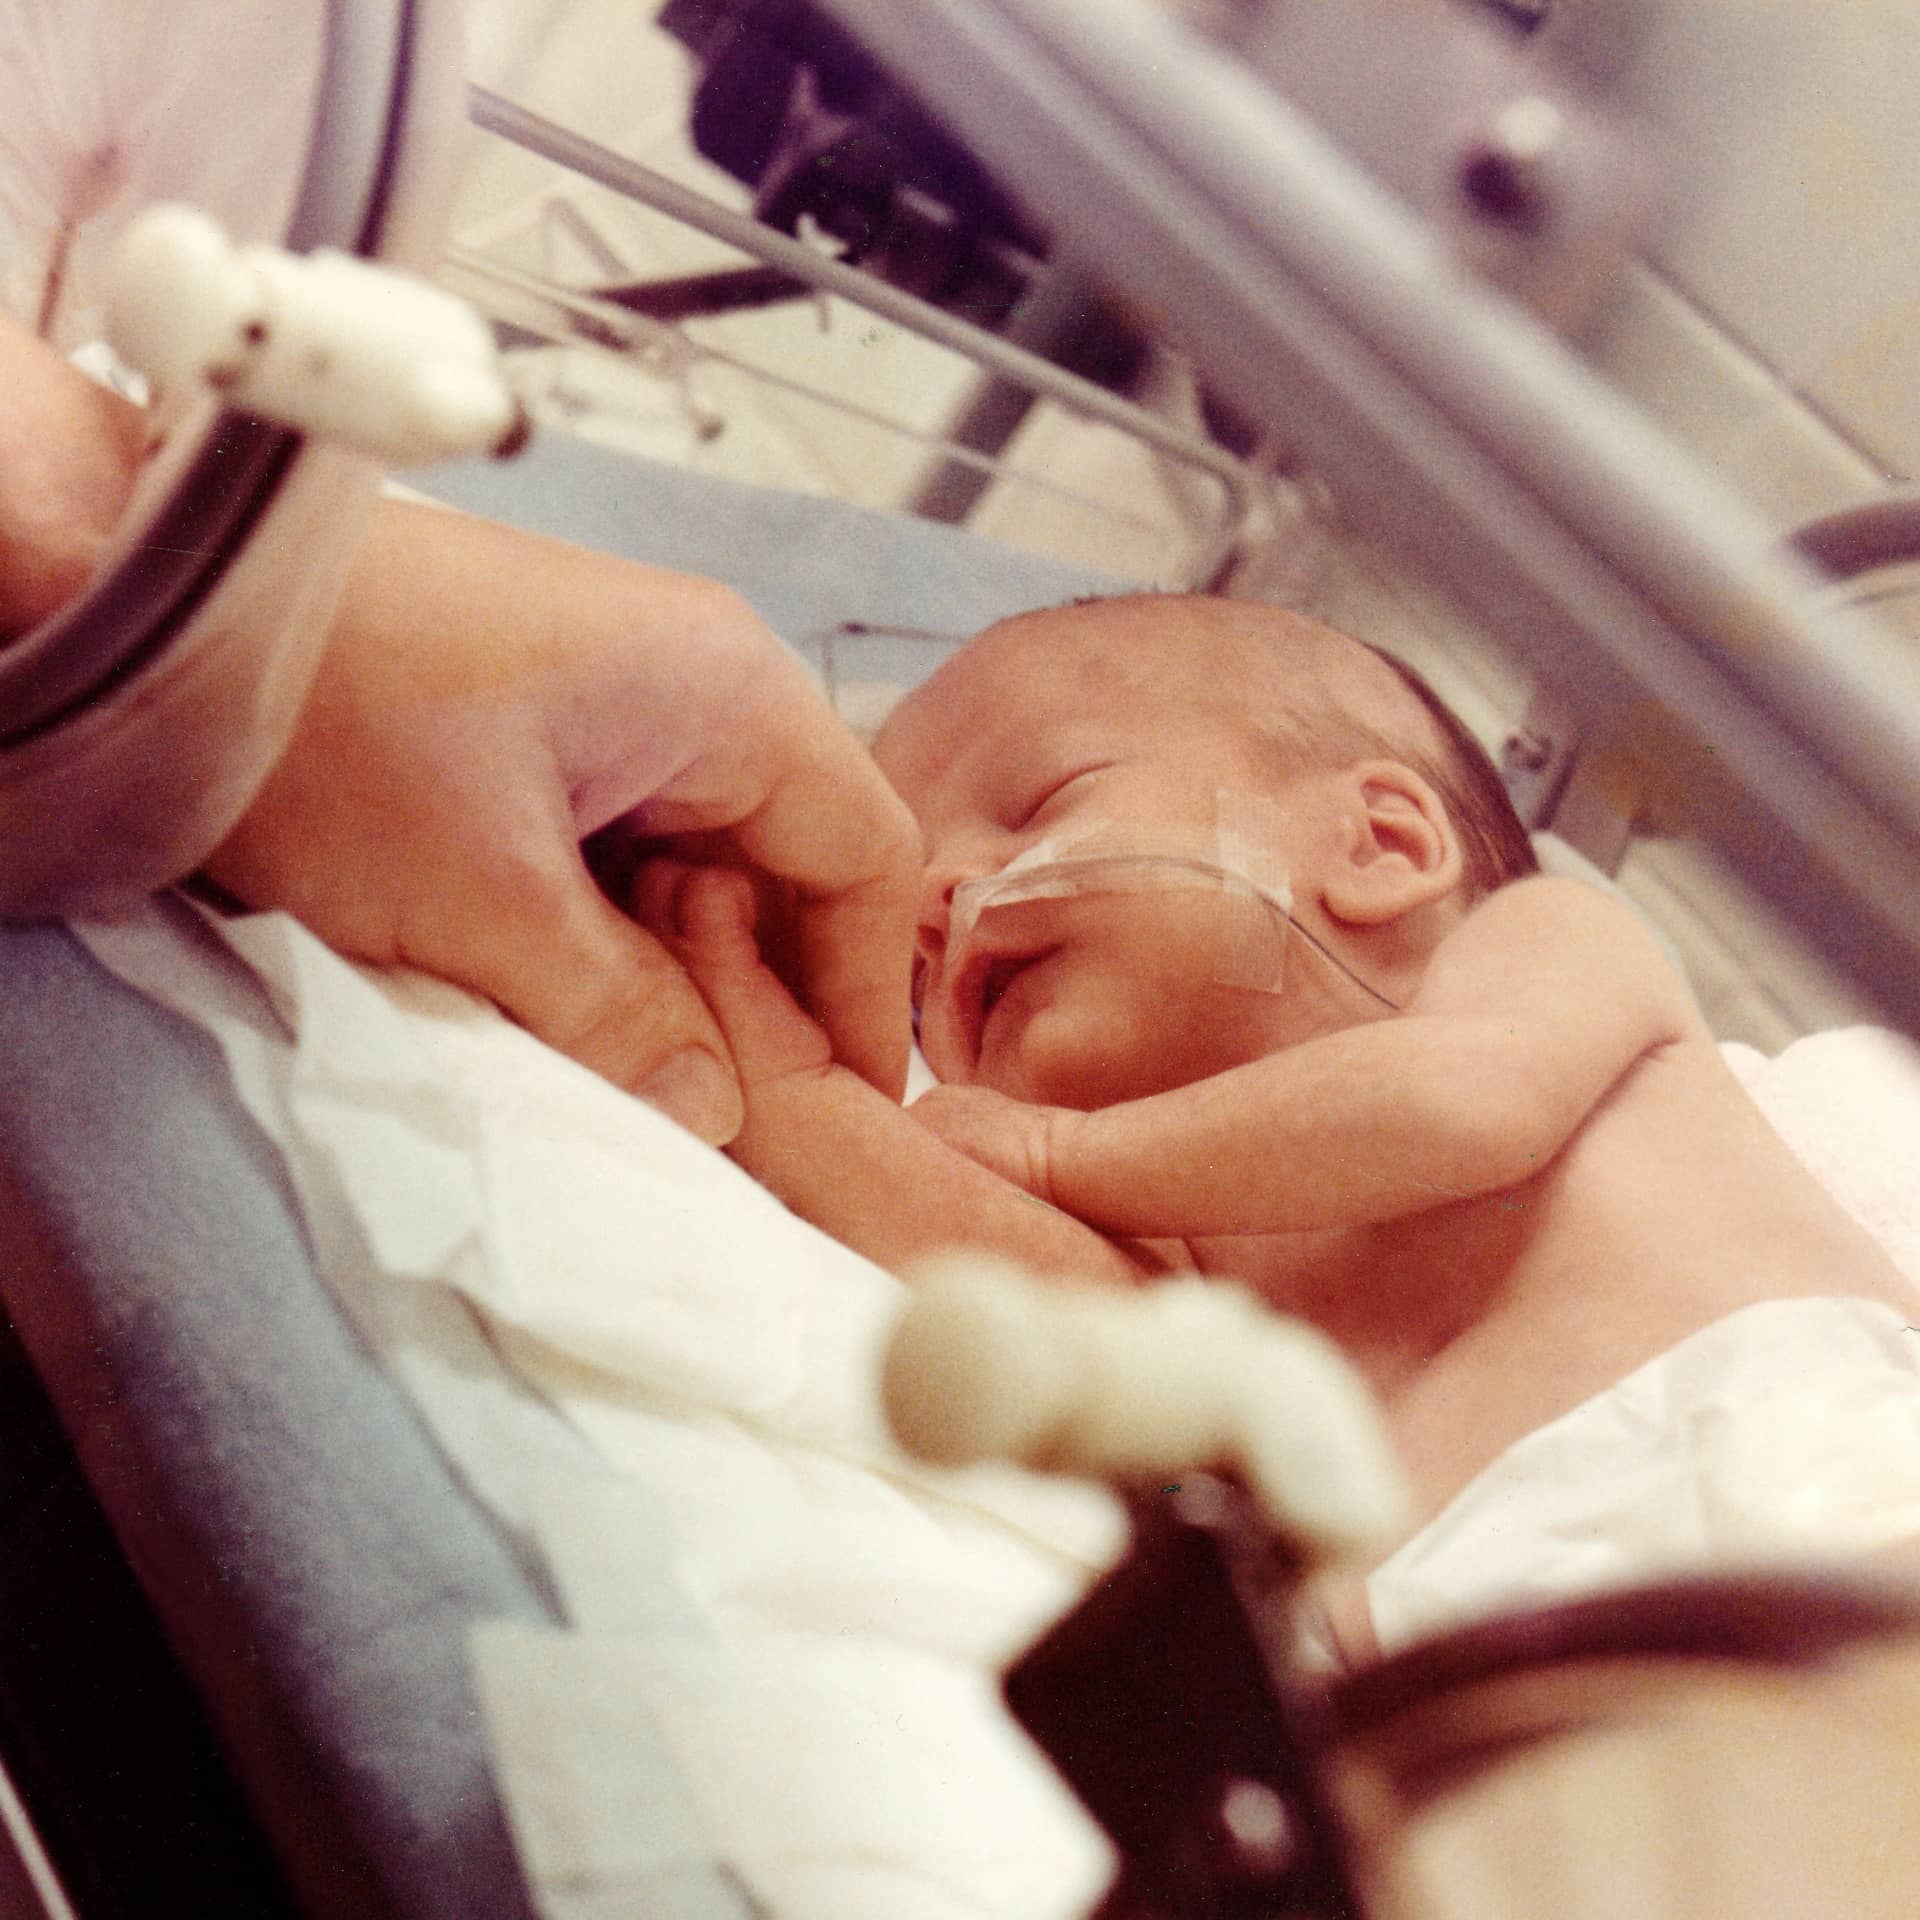 Baby lying on hospital bed